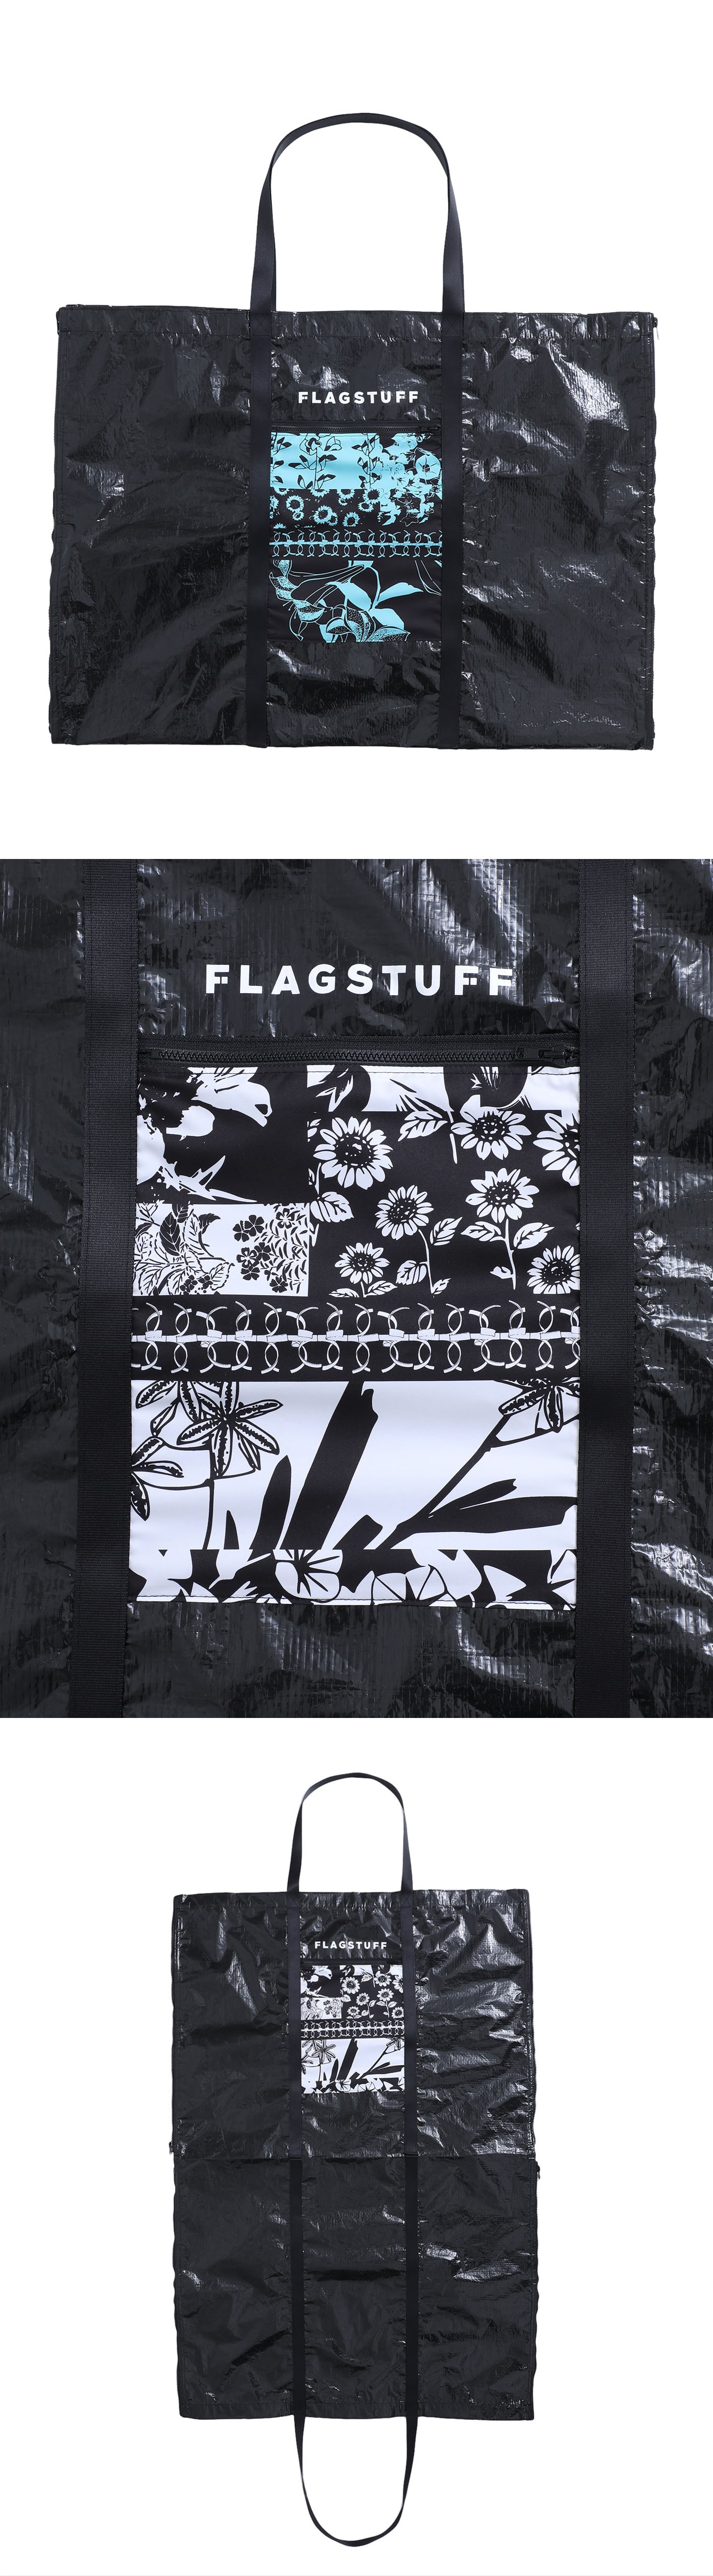 F-LAGSTUF-F EXCLUSIVE: ｜ STUDIOUS ONLINE公式通販サイト